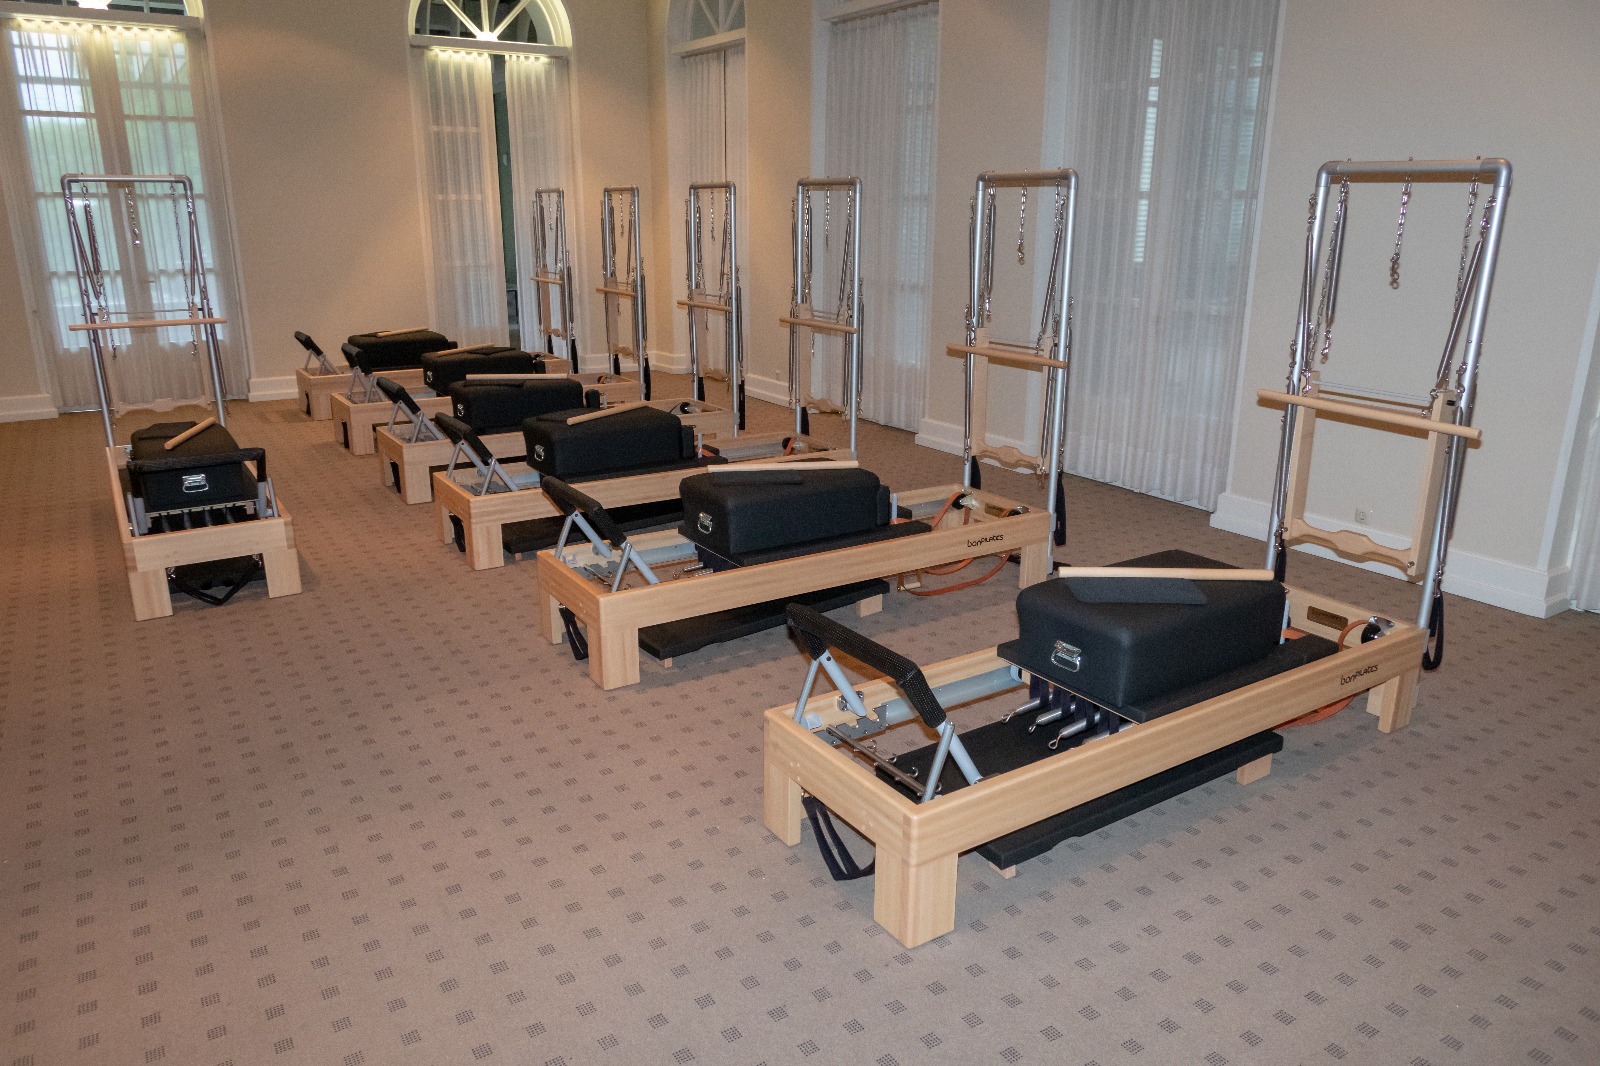 The classic reformer with a tower unit.